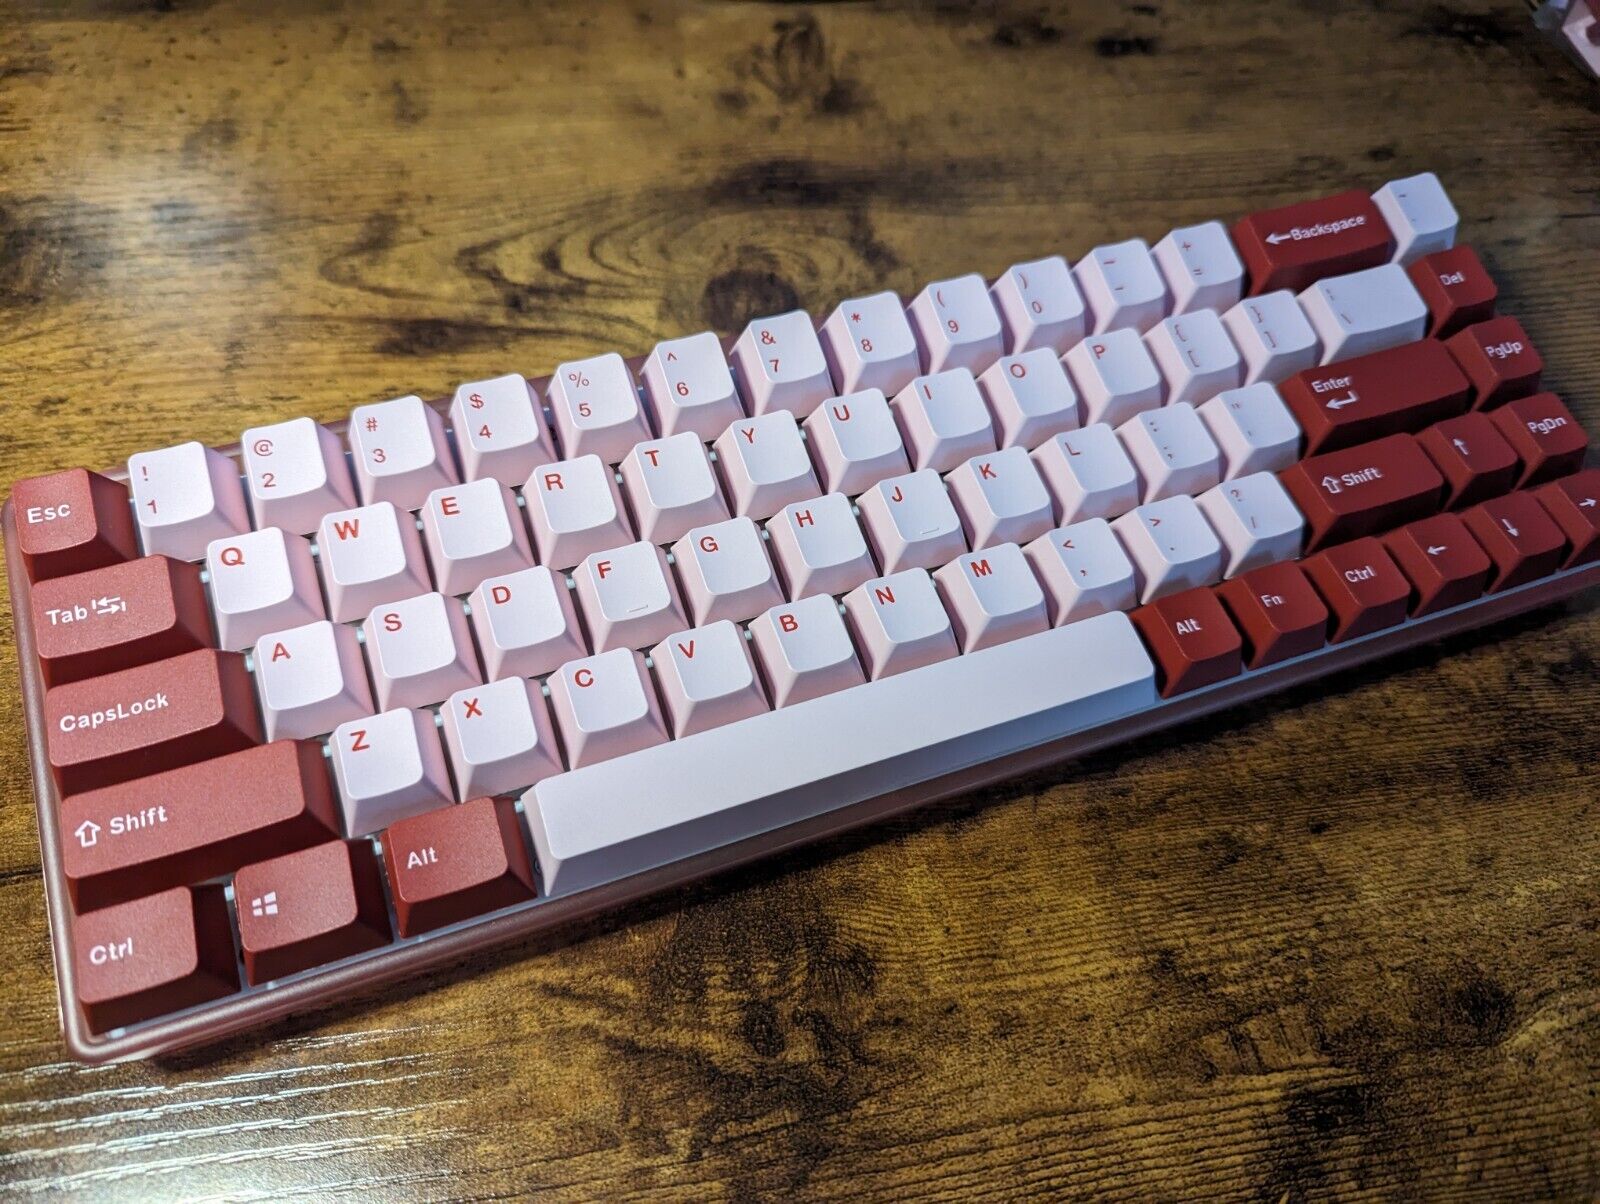 Custom modded budget mechanical keyboard CIY 68 pink red thocky hot-swappable